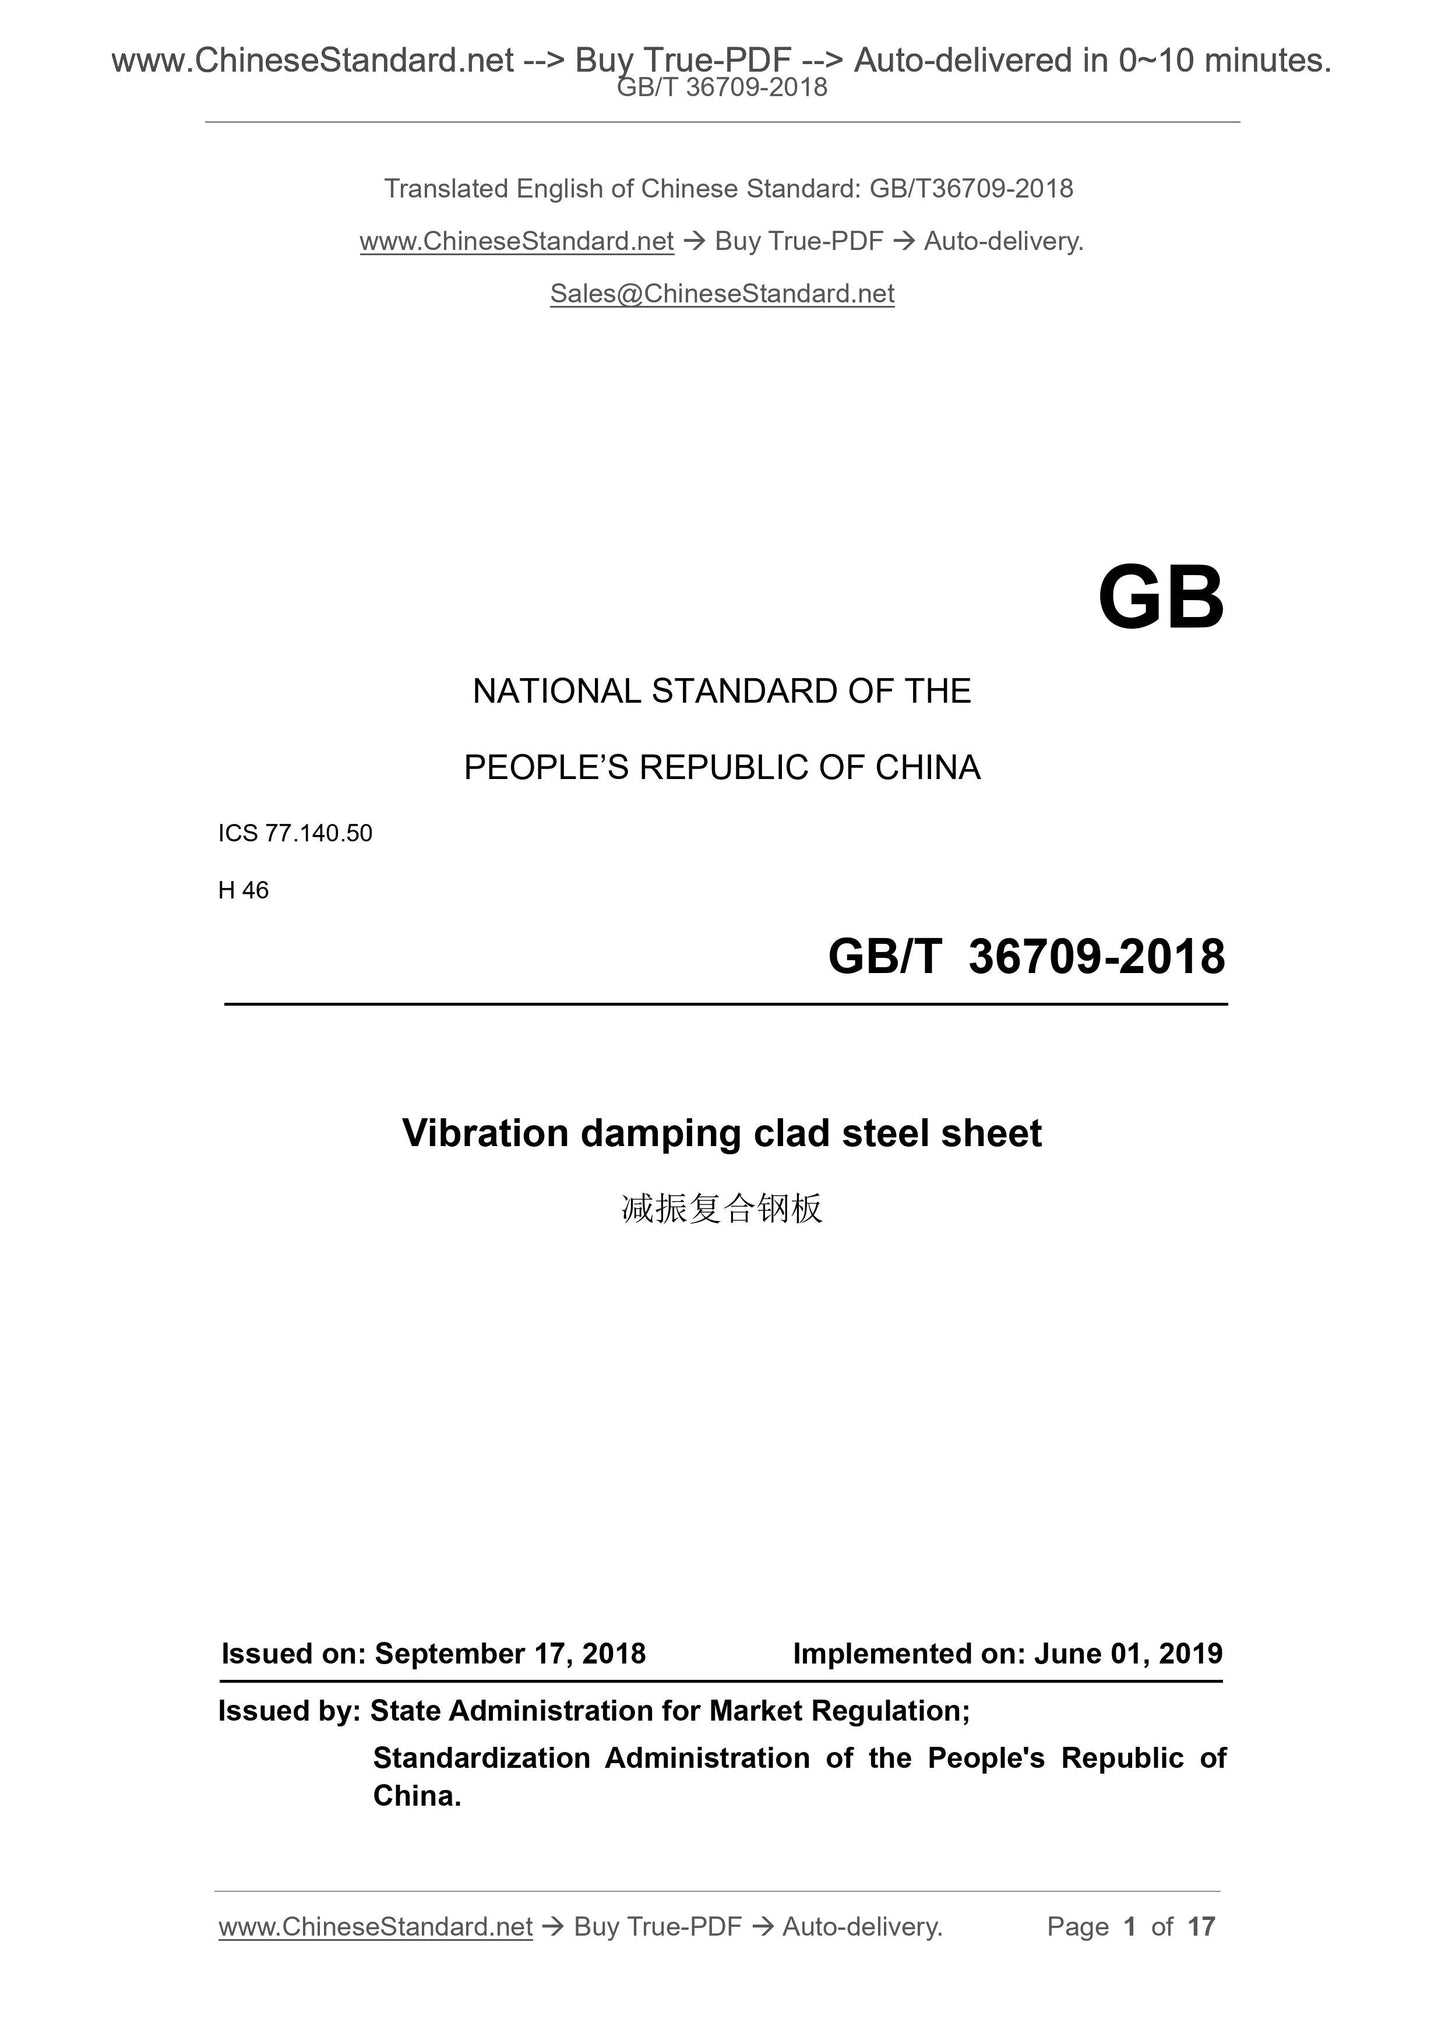 GB/T 36709-2018 Page 1